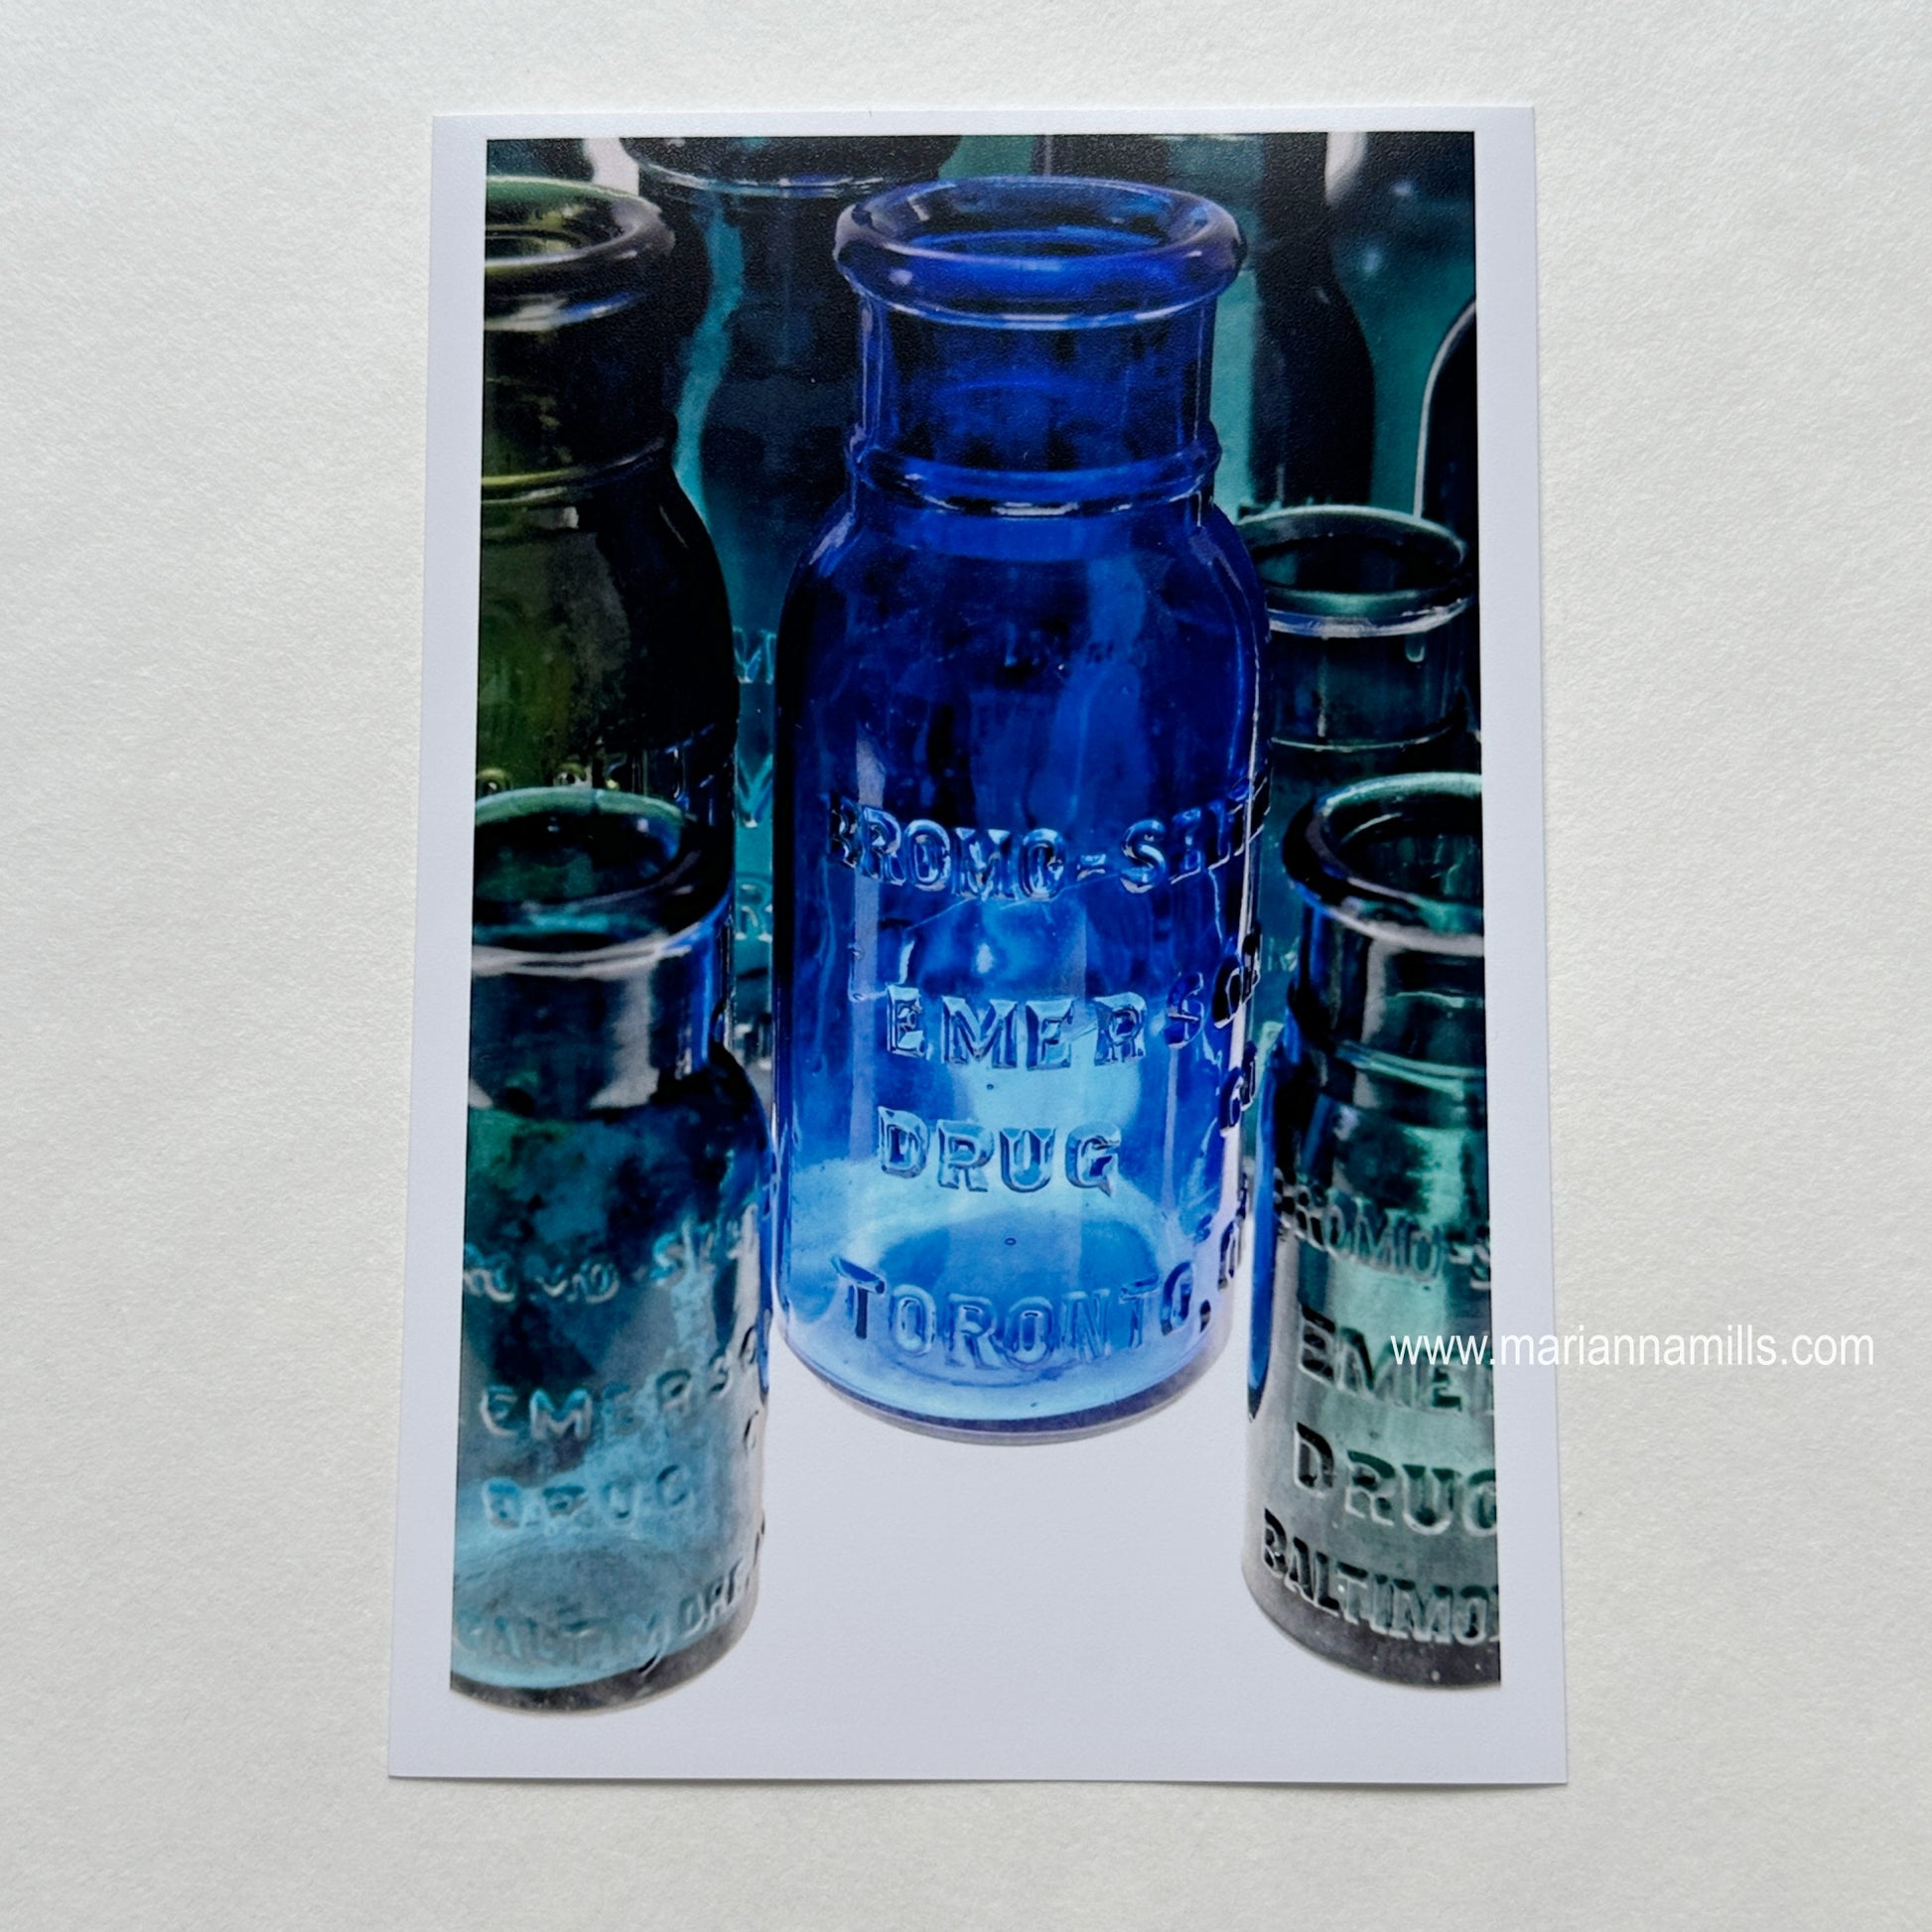 Bromo Seltzer Vintage Glass Bottles Rare Greens Fine Art Photography 4x6 inches by Marianna Mills